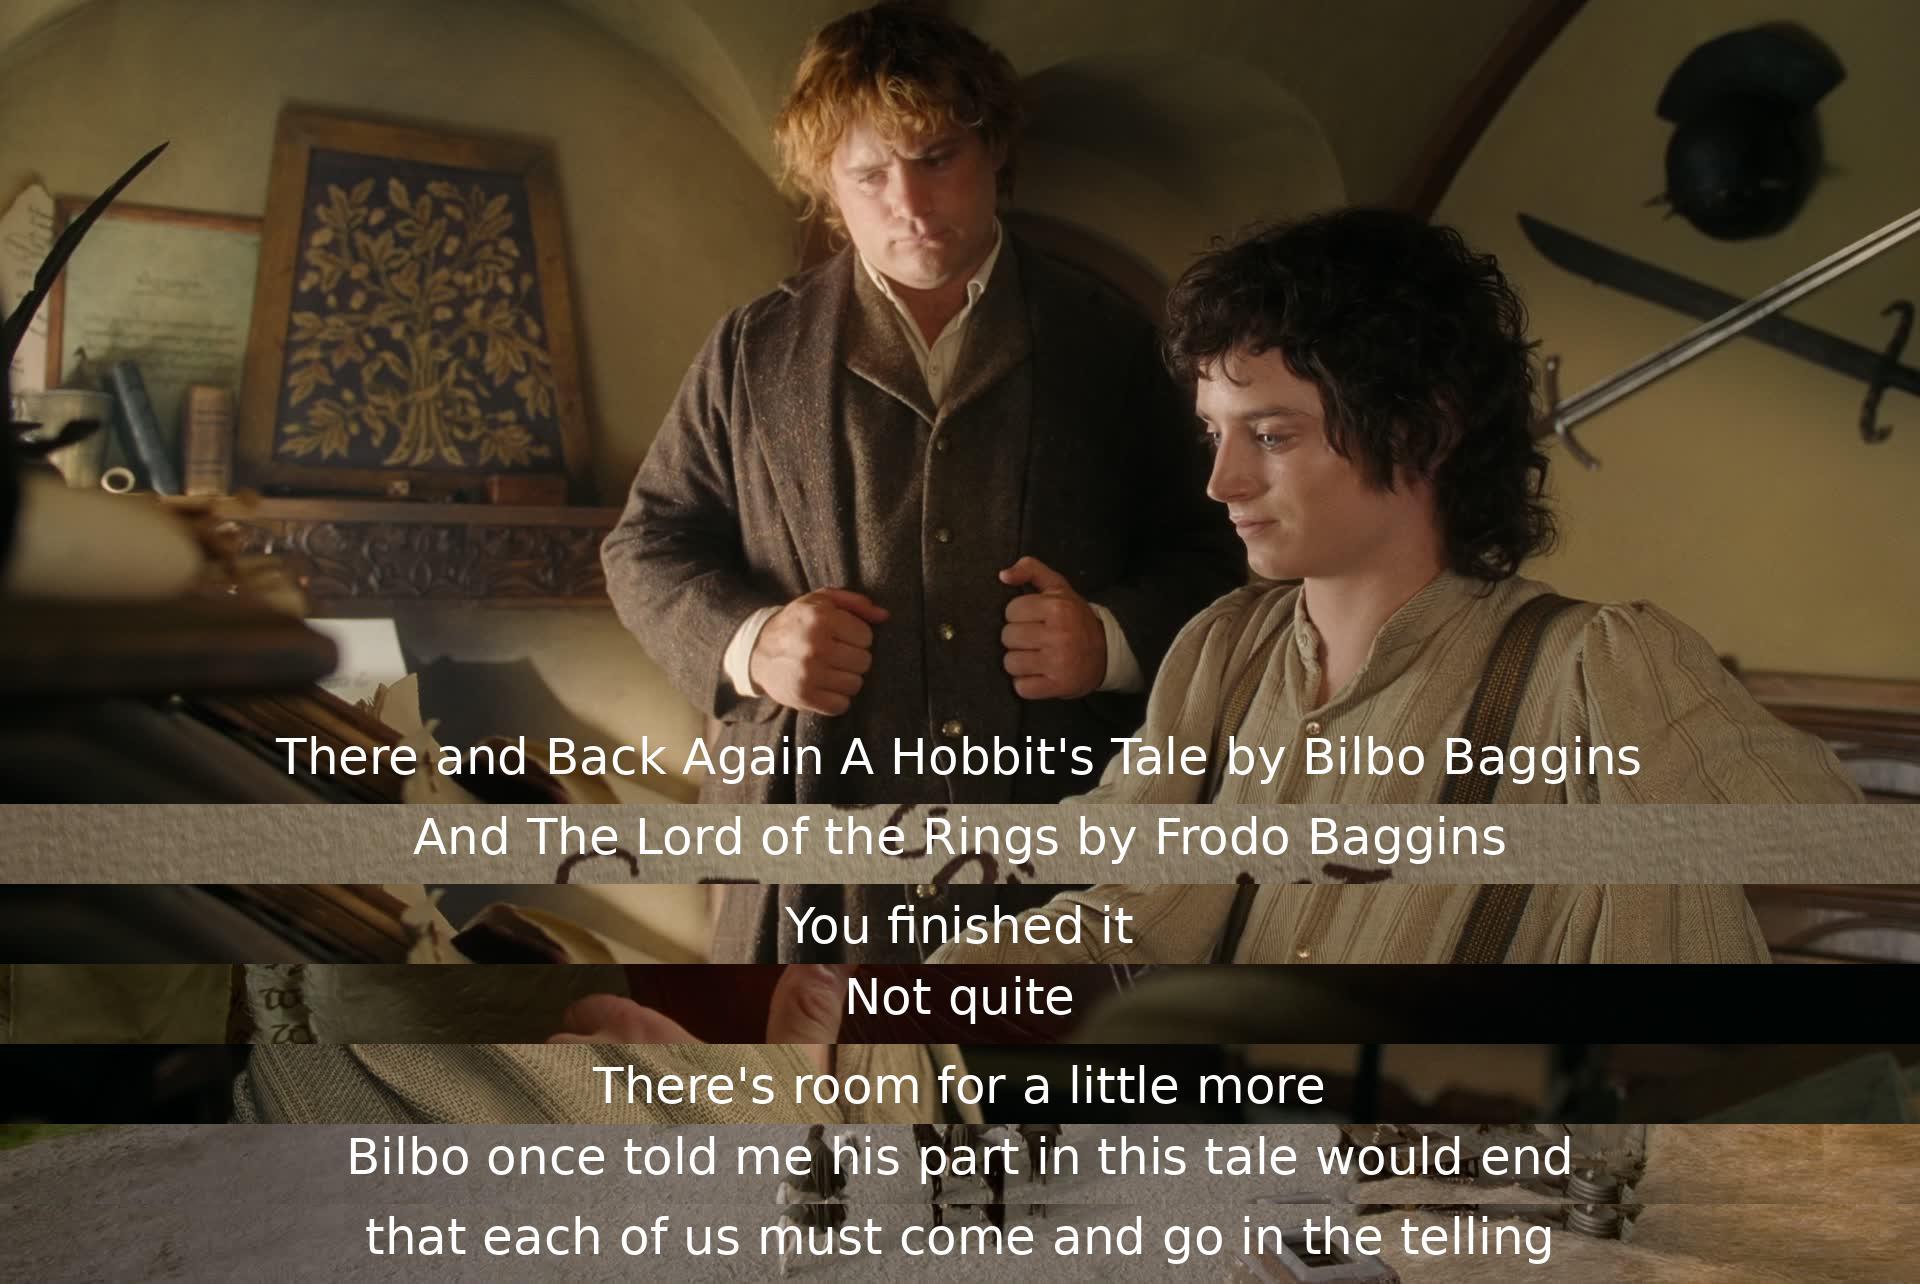 Bilbo Baggins completed his book, and Frodo Baggins reflected that there was more to add. Bilbo had mentioned that his part in the story would come to an end, and every character had a role to play in the tale.